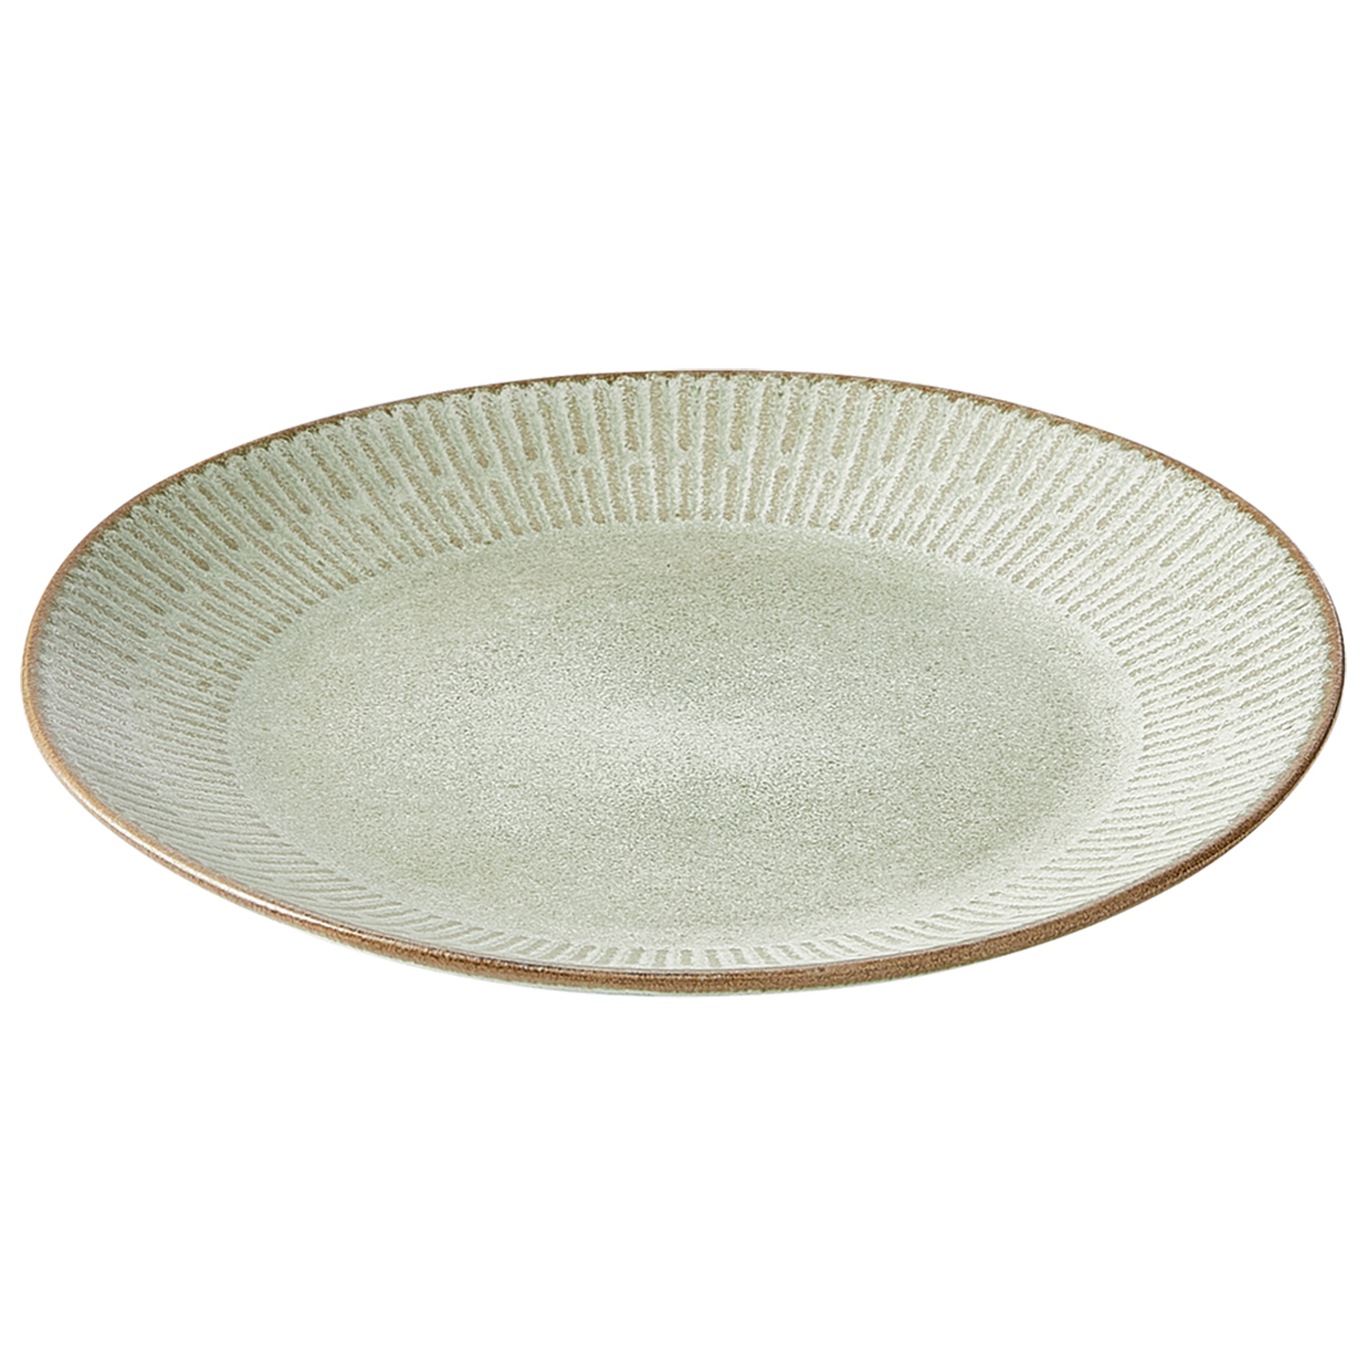 Relief Plate 22 cm, Green